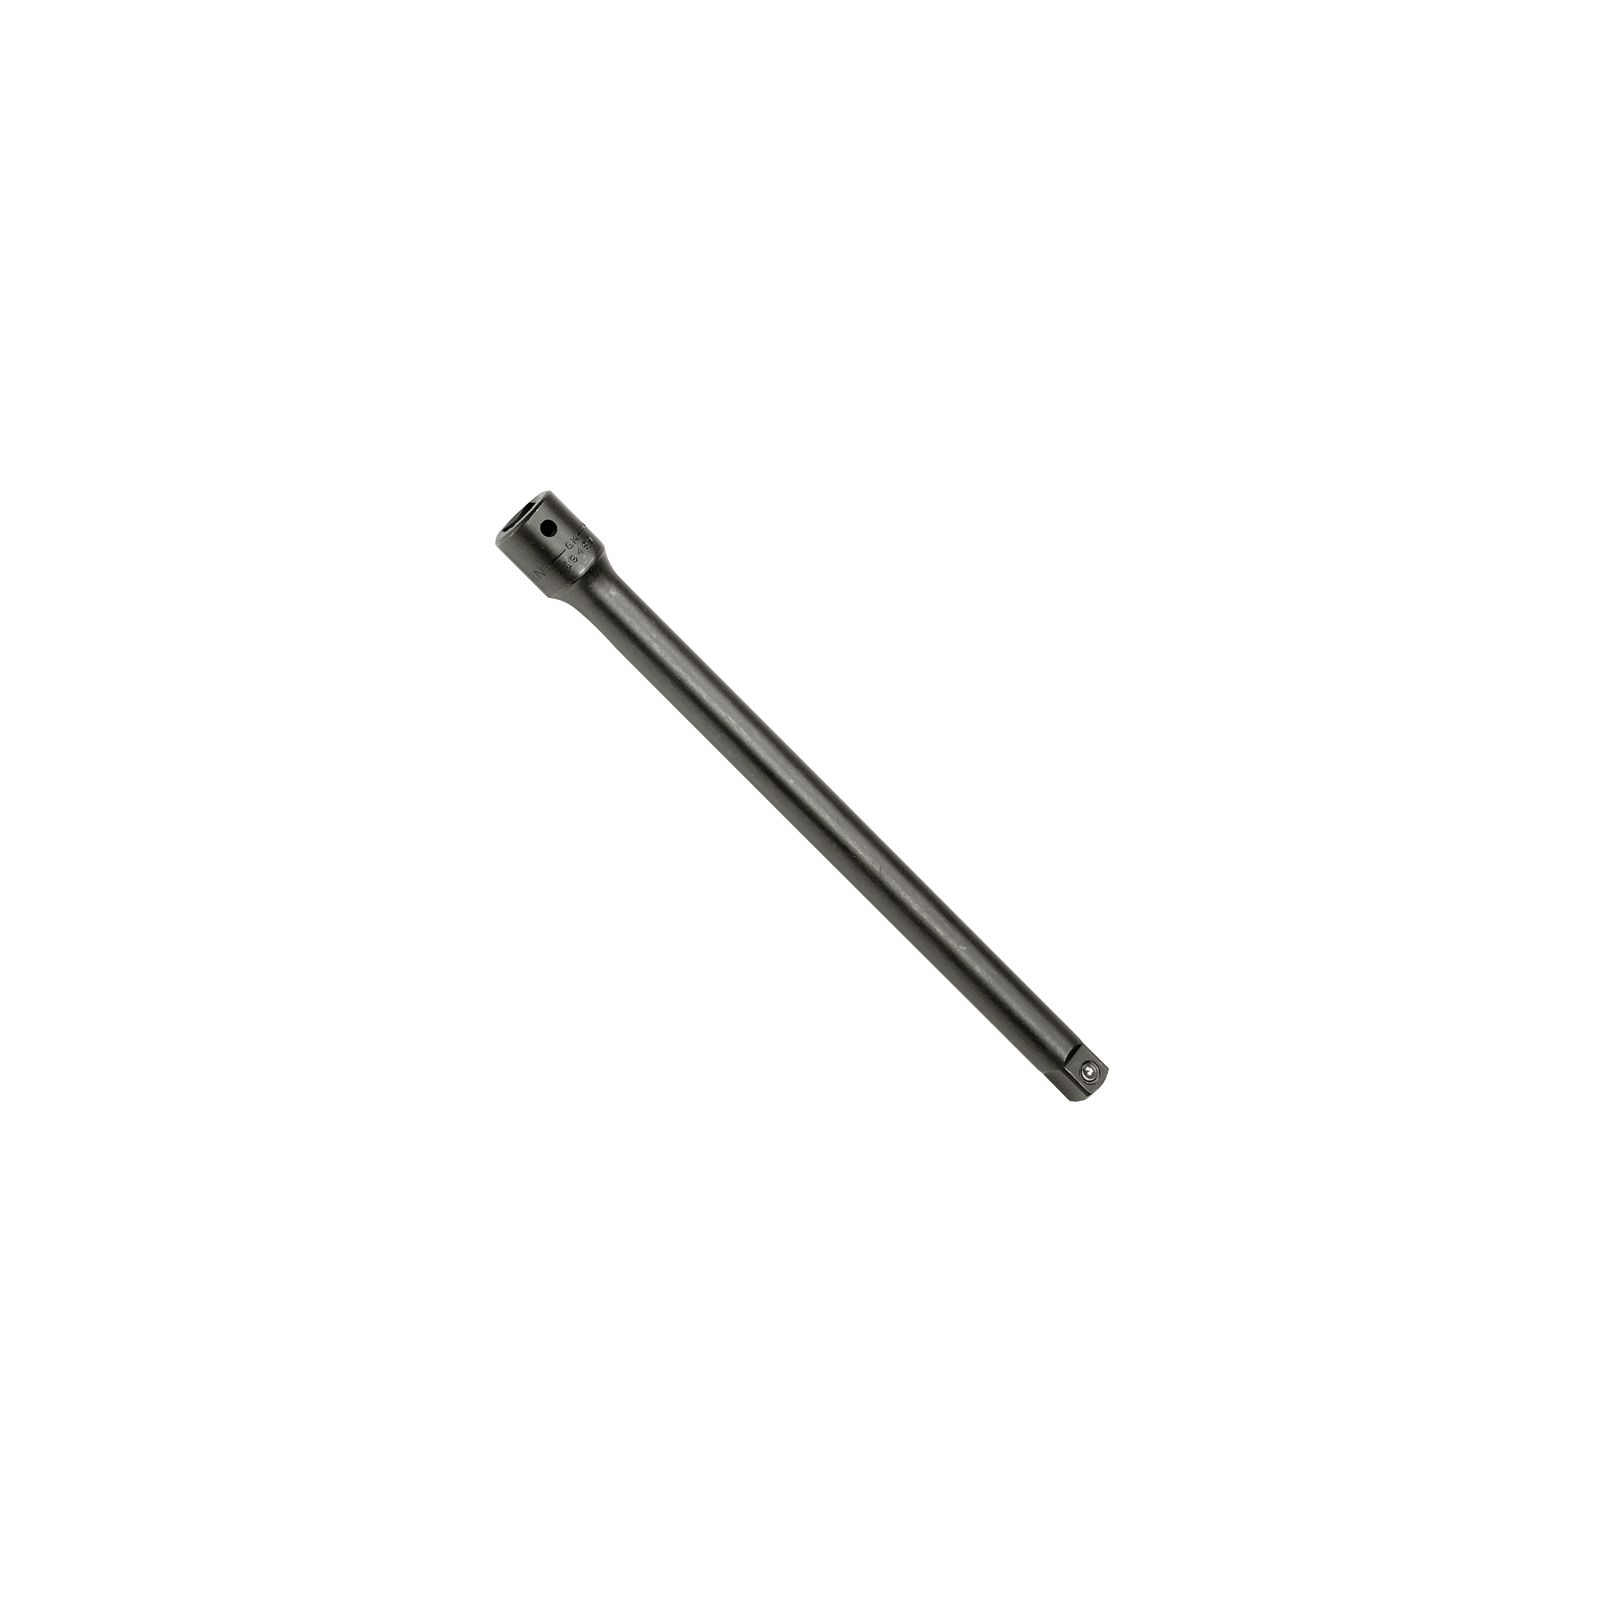 0714994194996 - 10 IN. IMPACT EXTENSION BAR, 1/2 IN. DRIVE